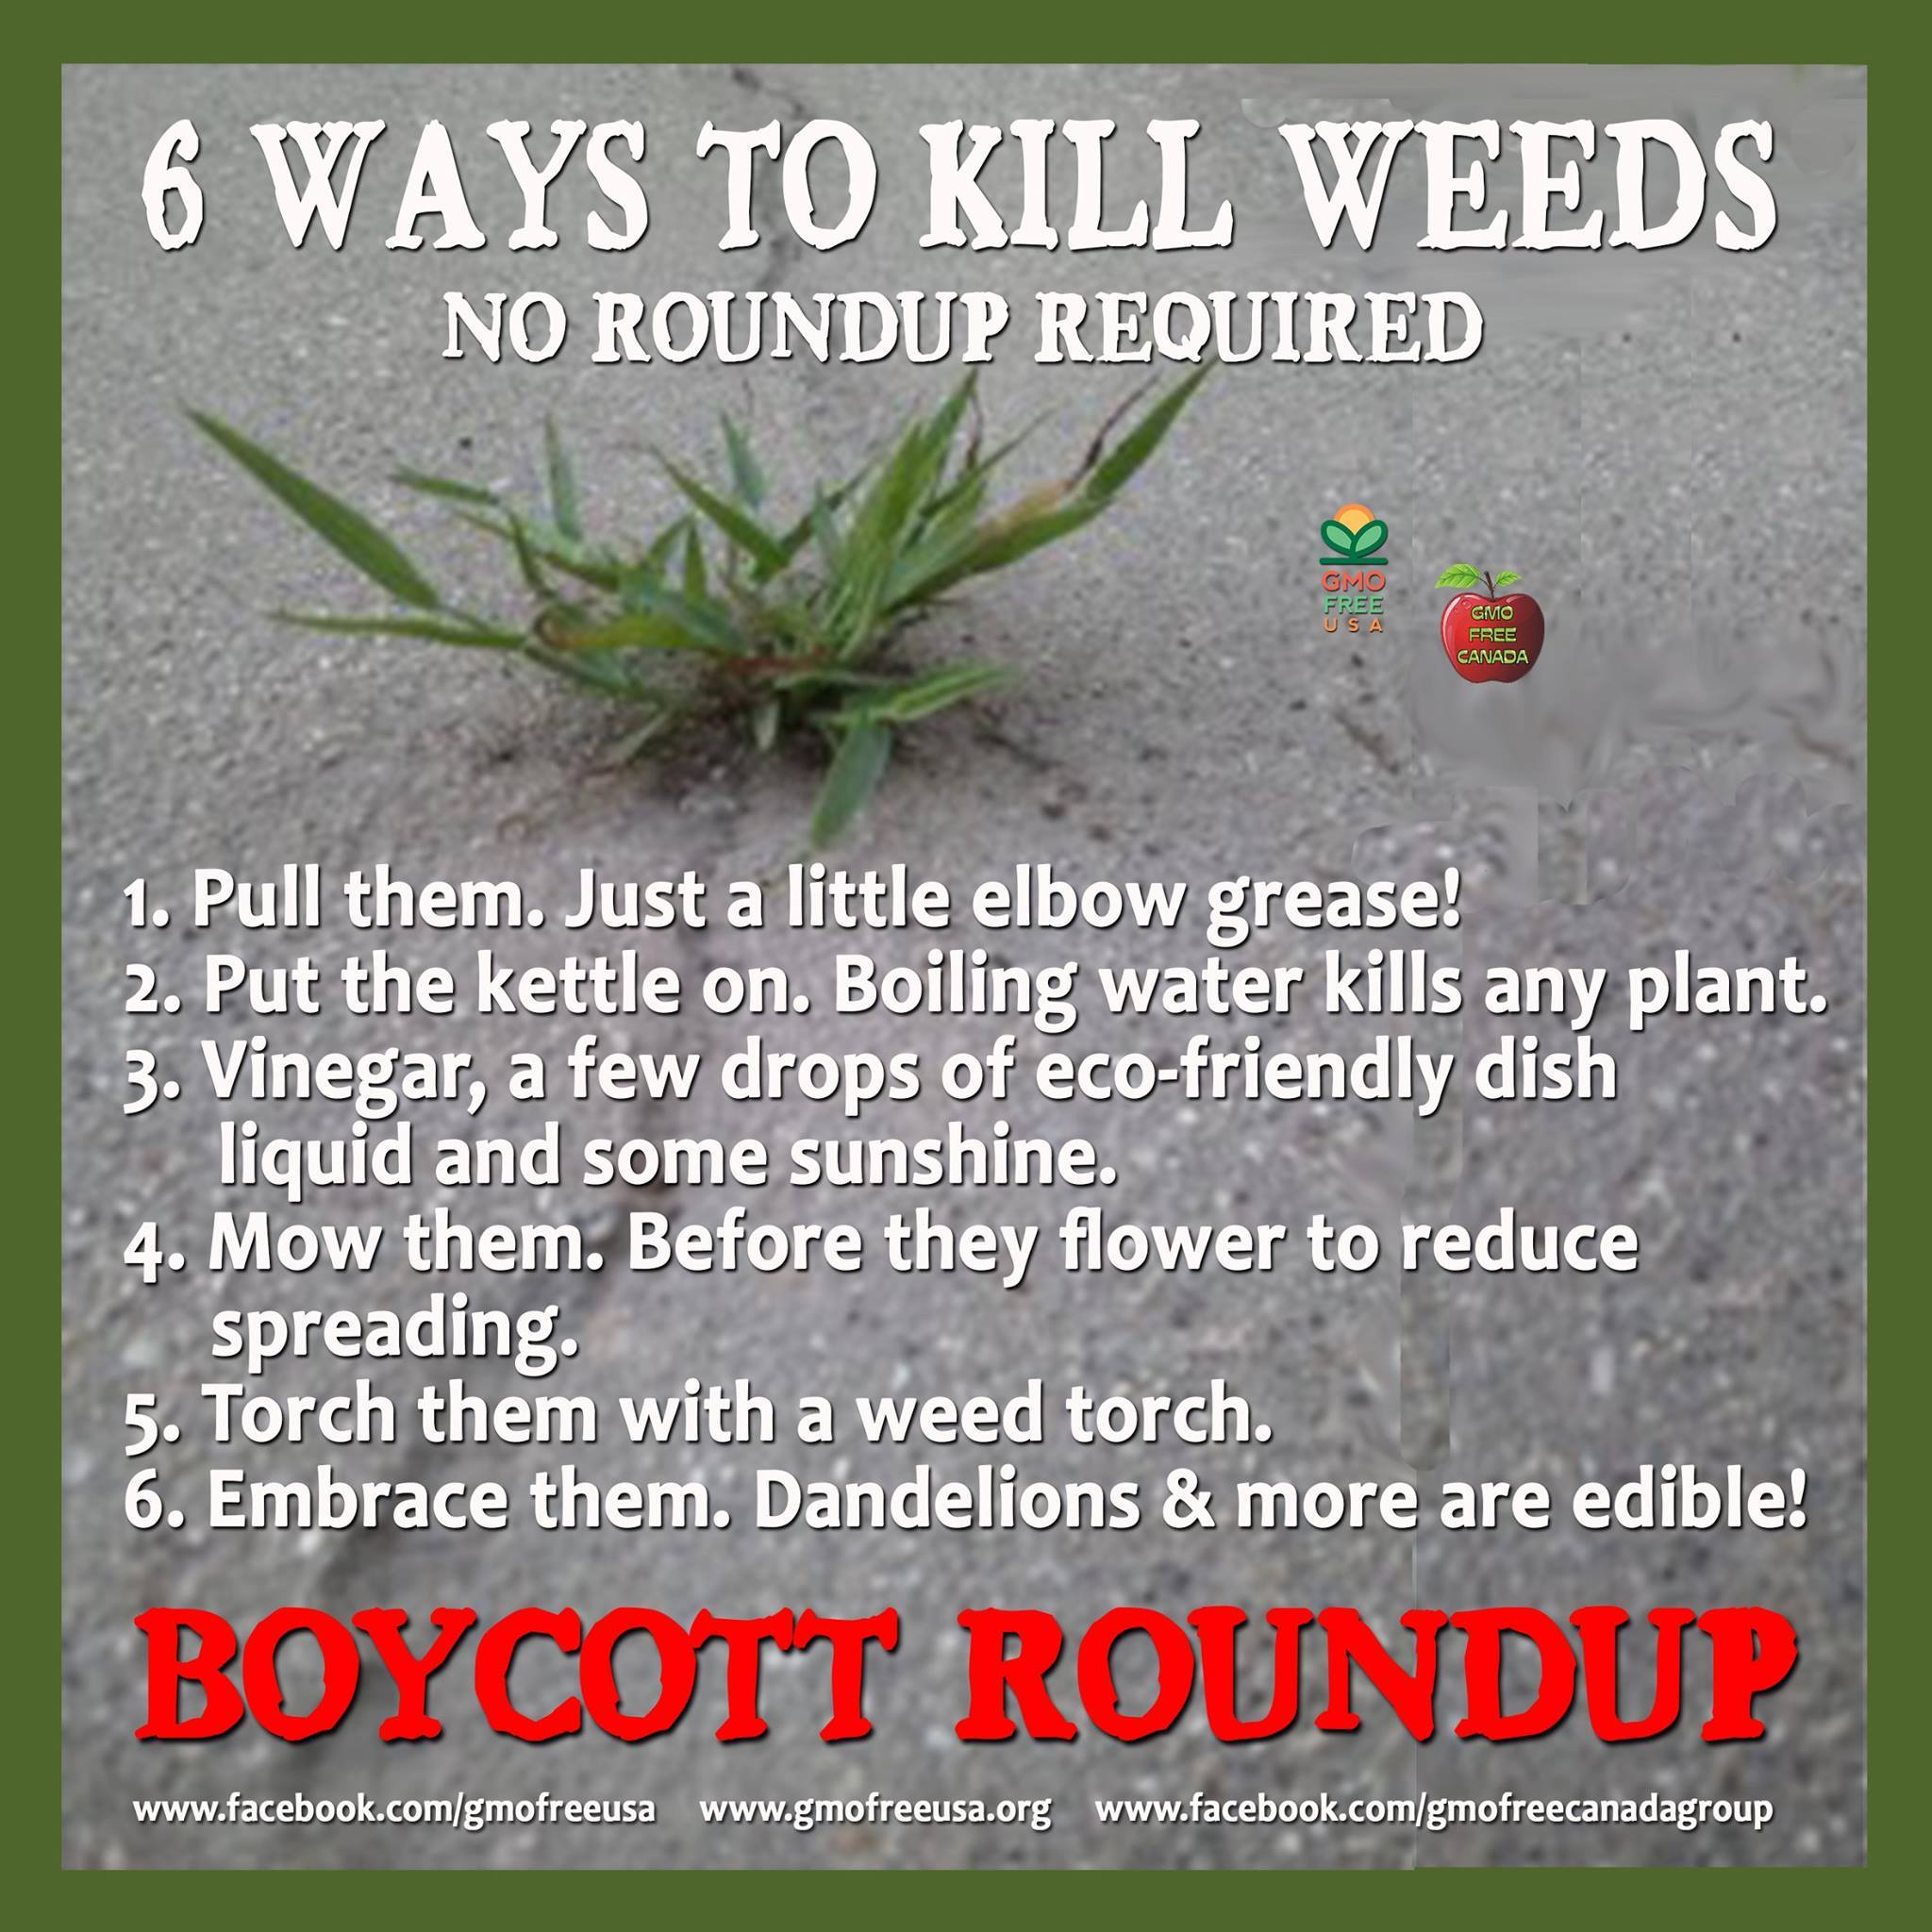 6 ways to kill weeks, no roundup required, herbicides, pollution, dangerous chemicals